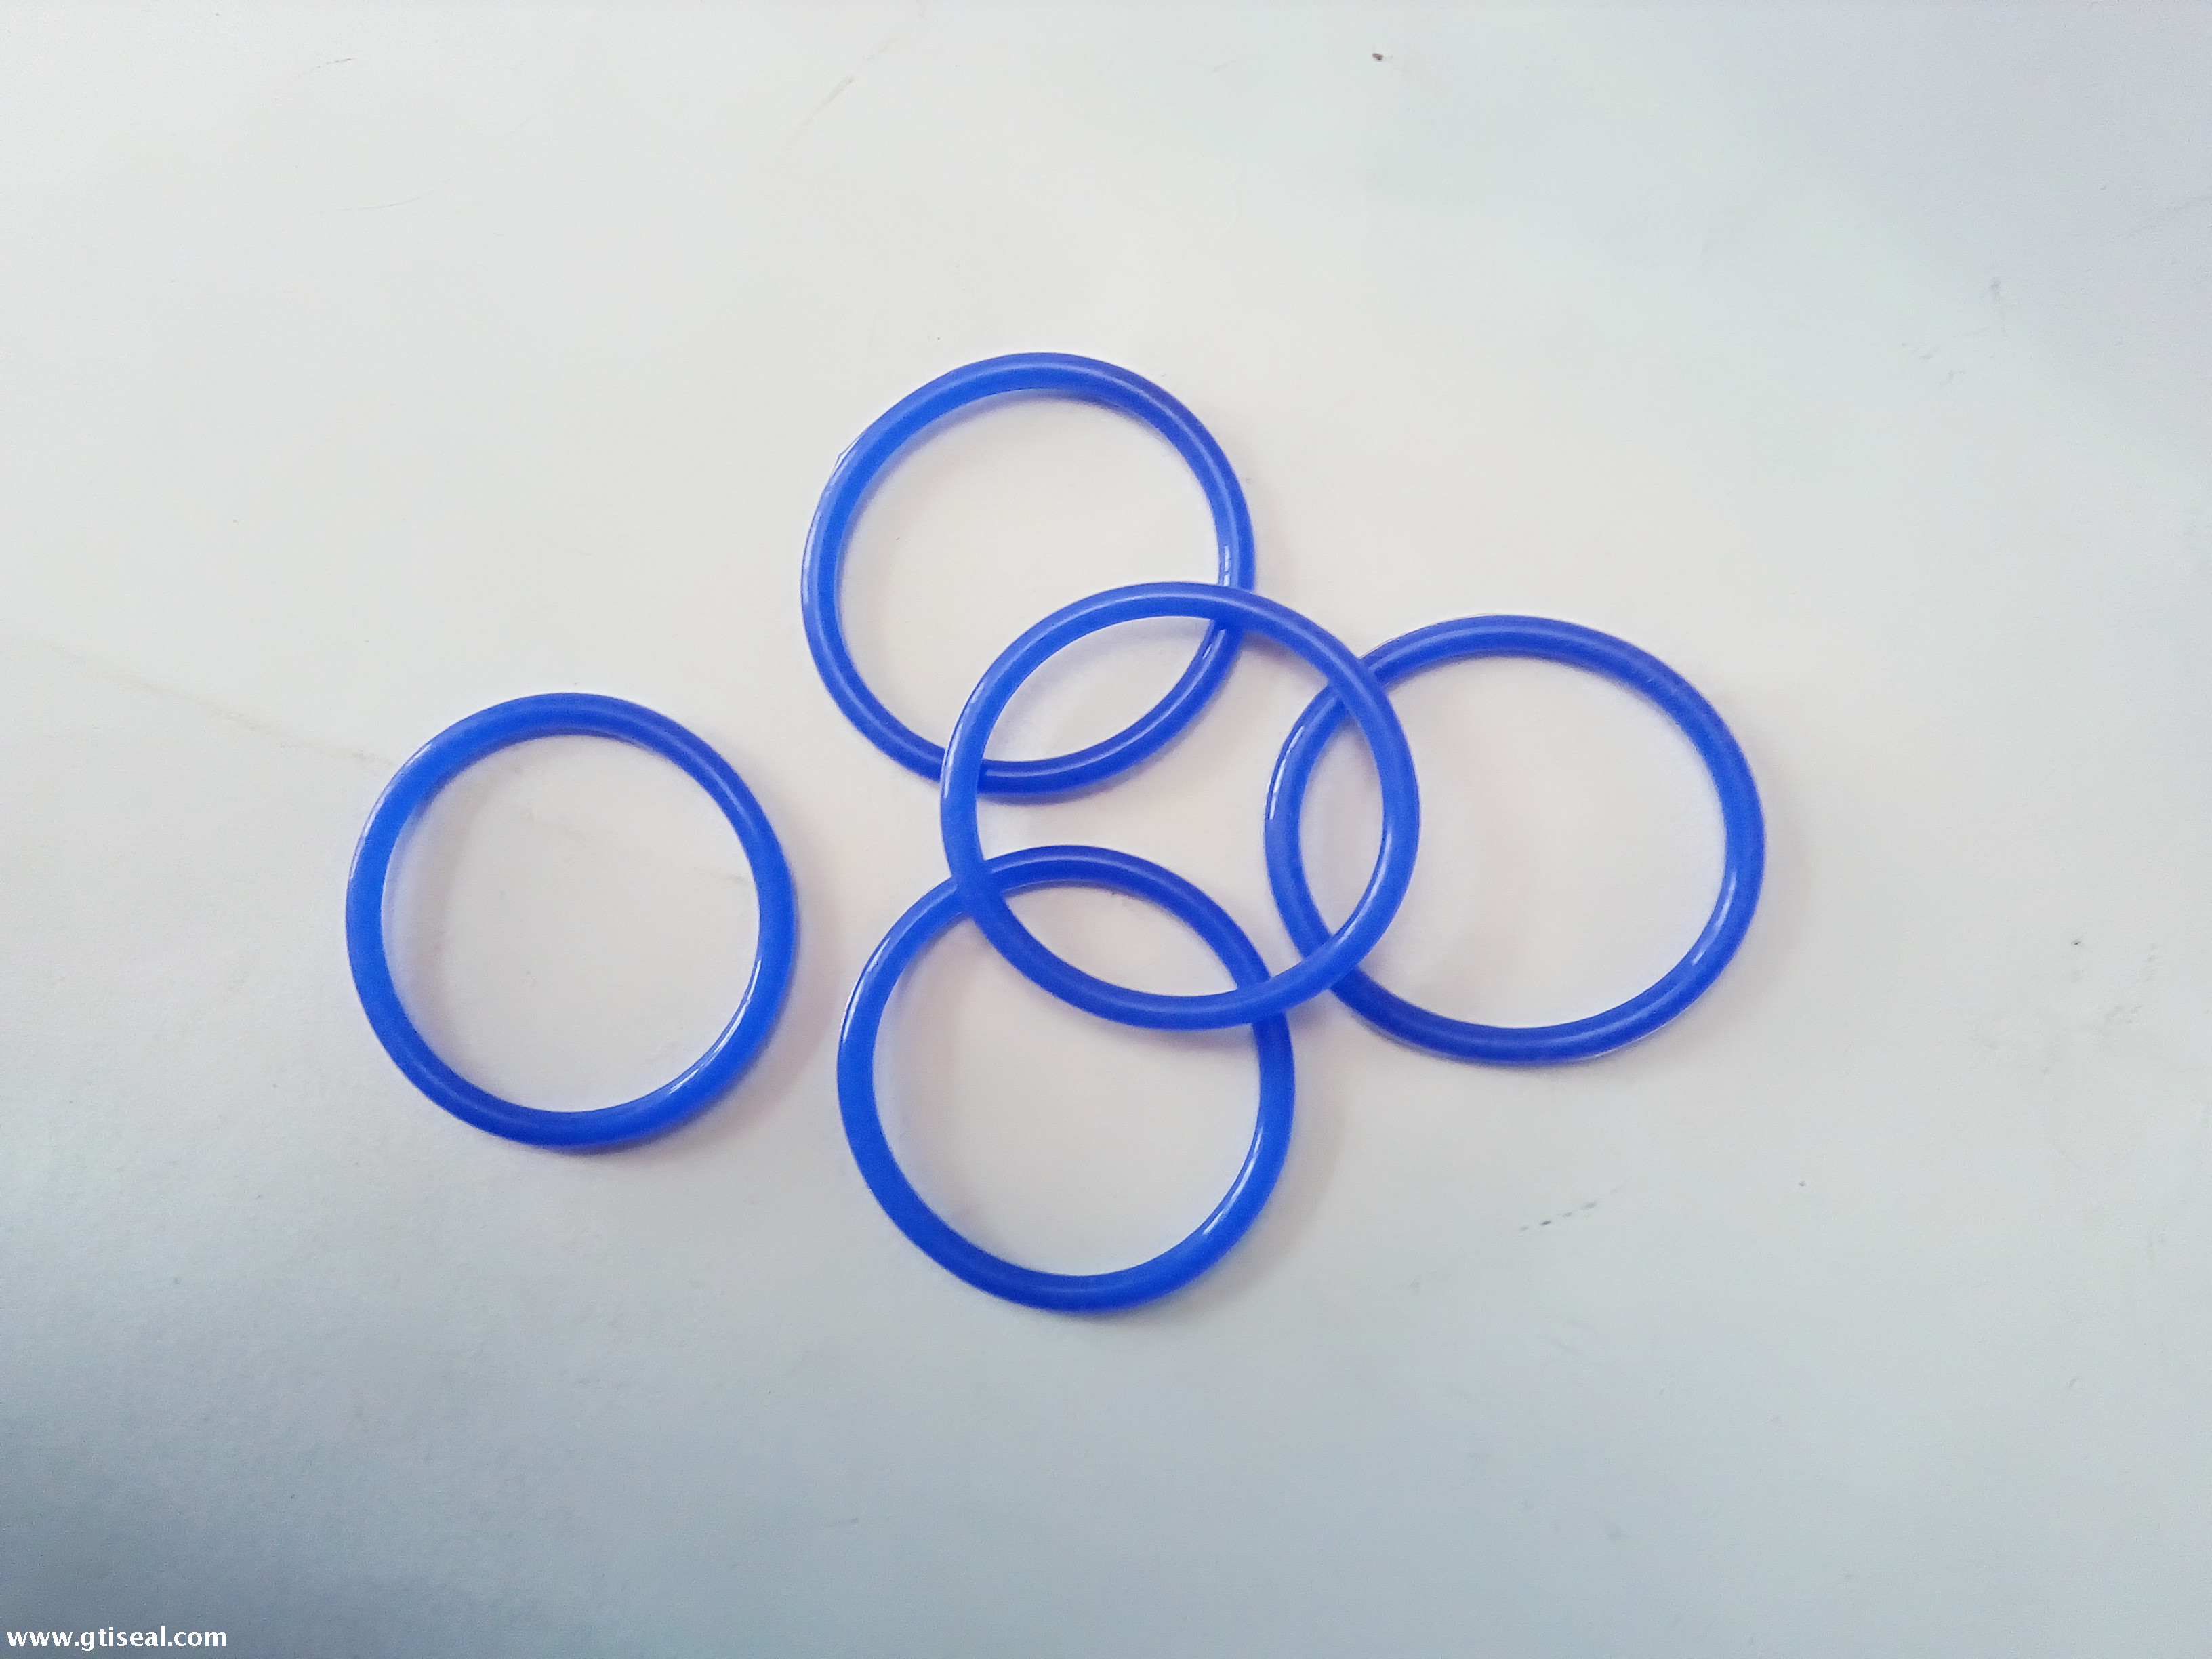 Good quality o ring style and rubber material yellow color box oring kit box good prices